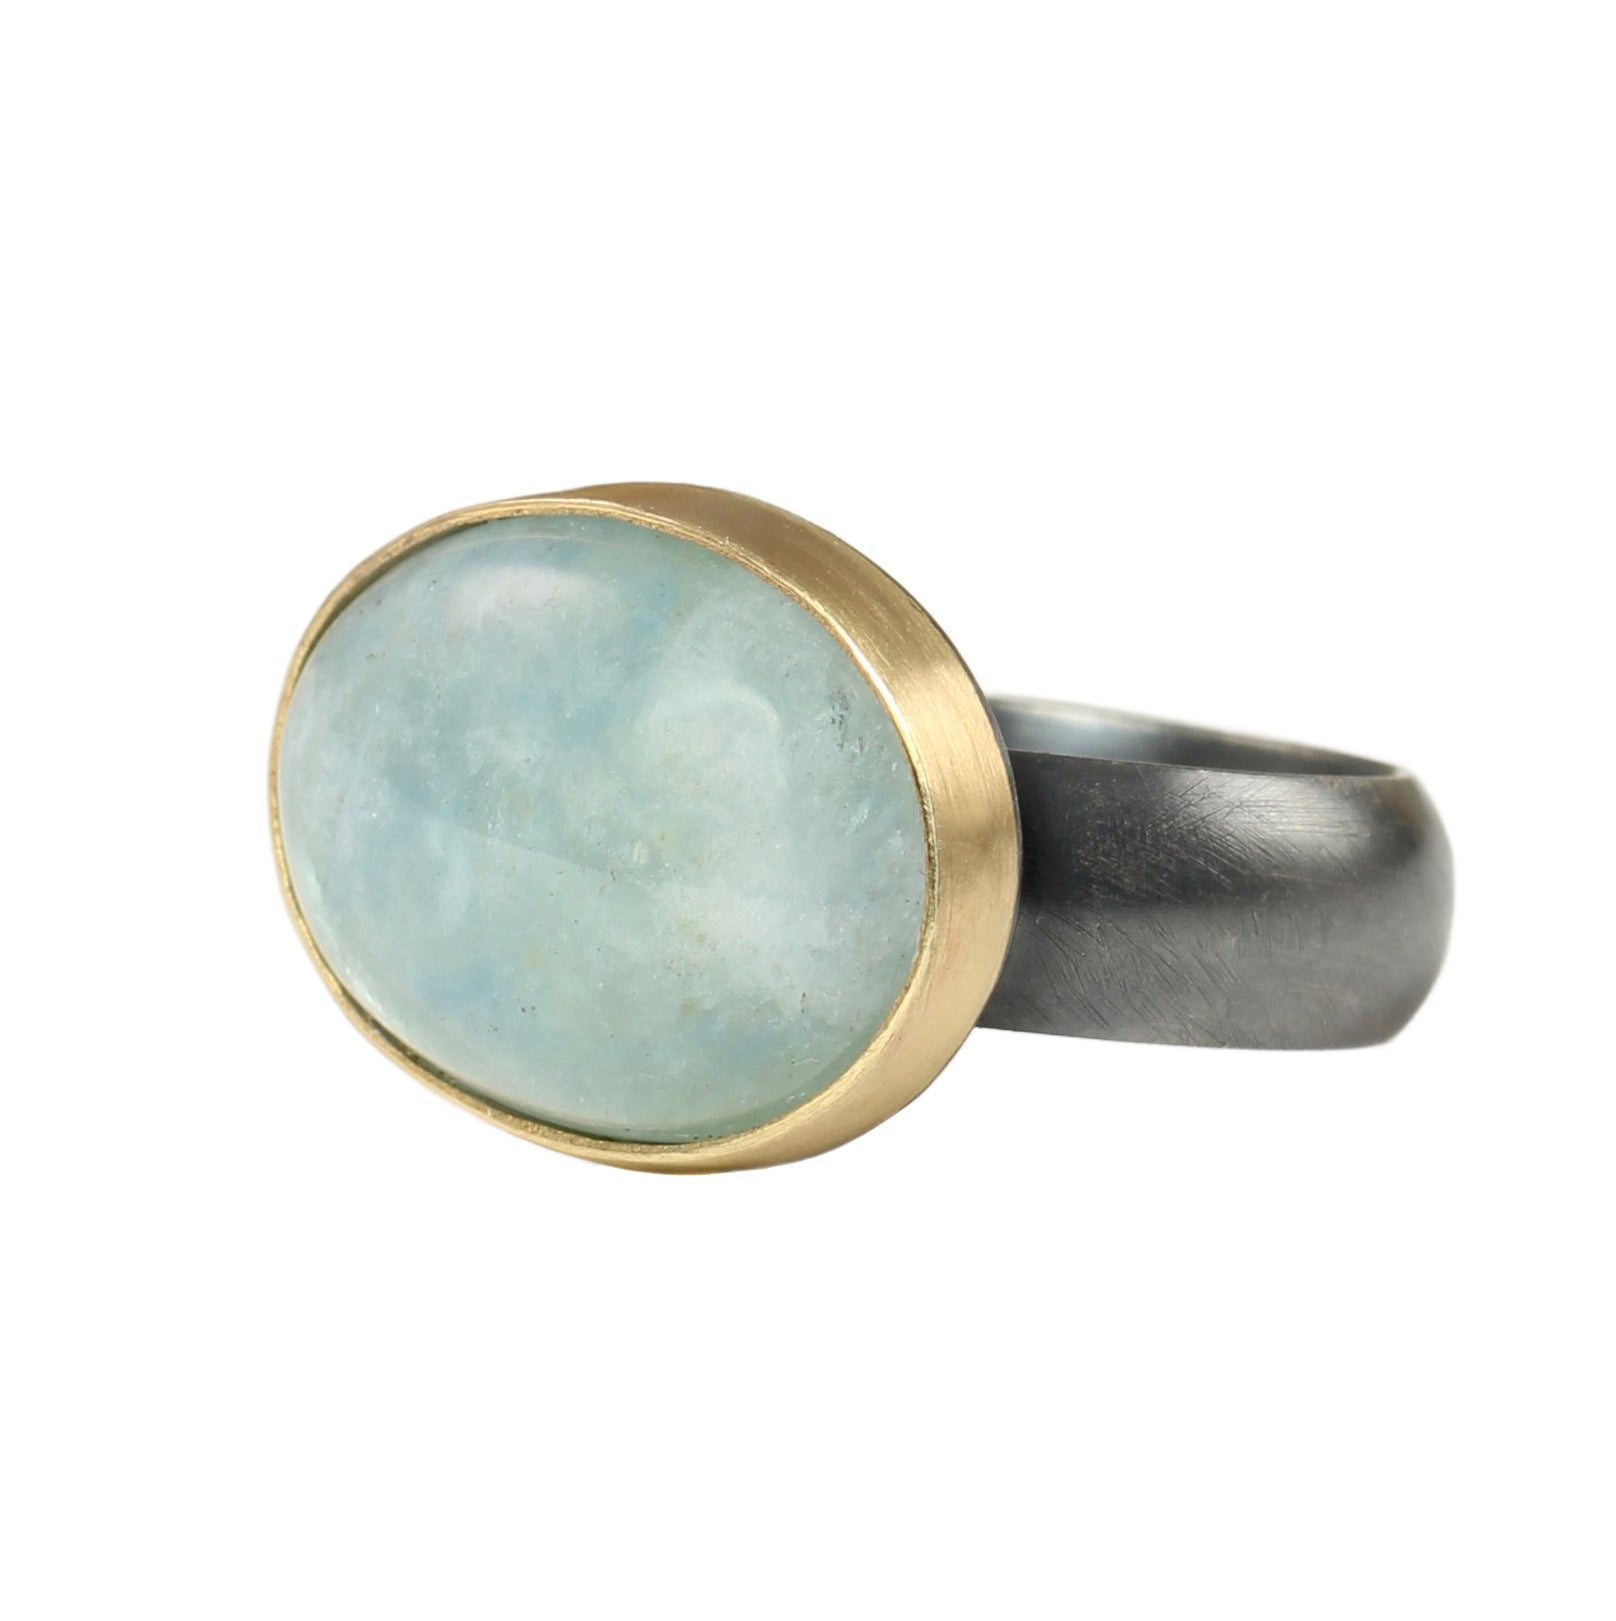 Aquamarine Ring in Sterling Silver & 14k Gold